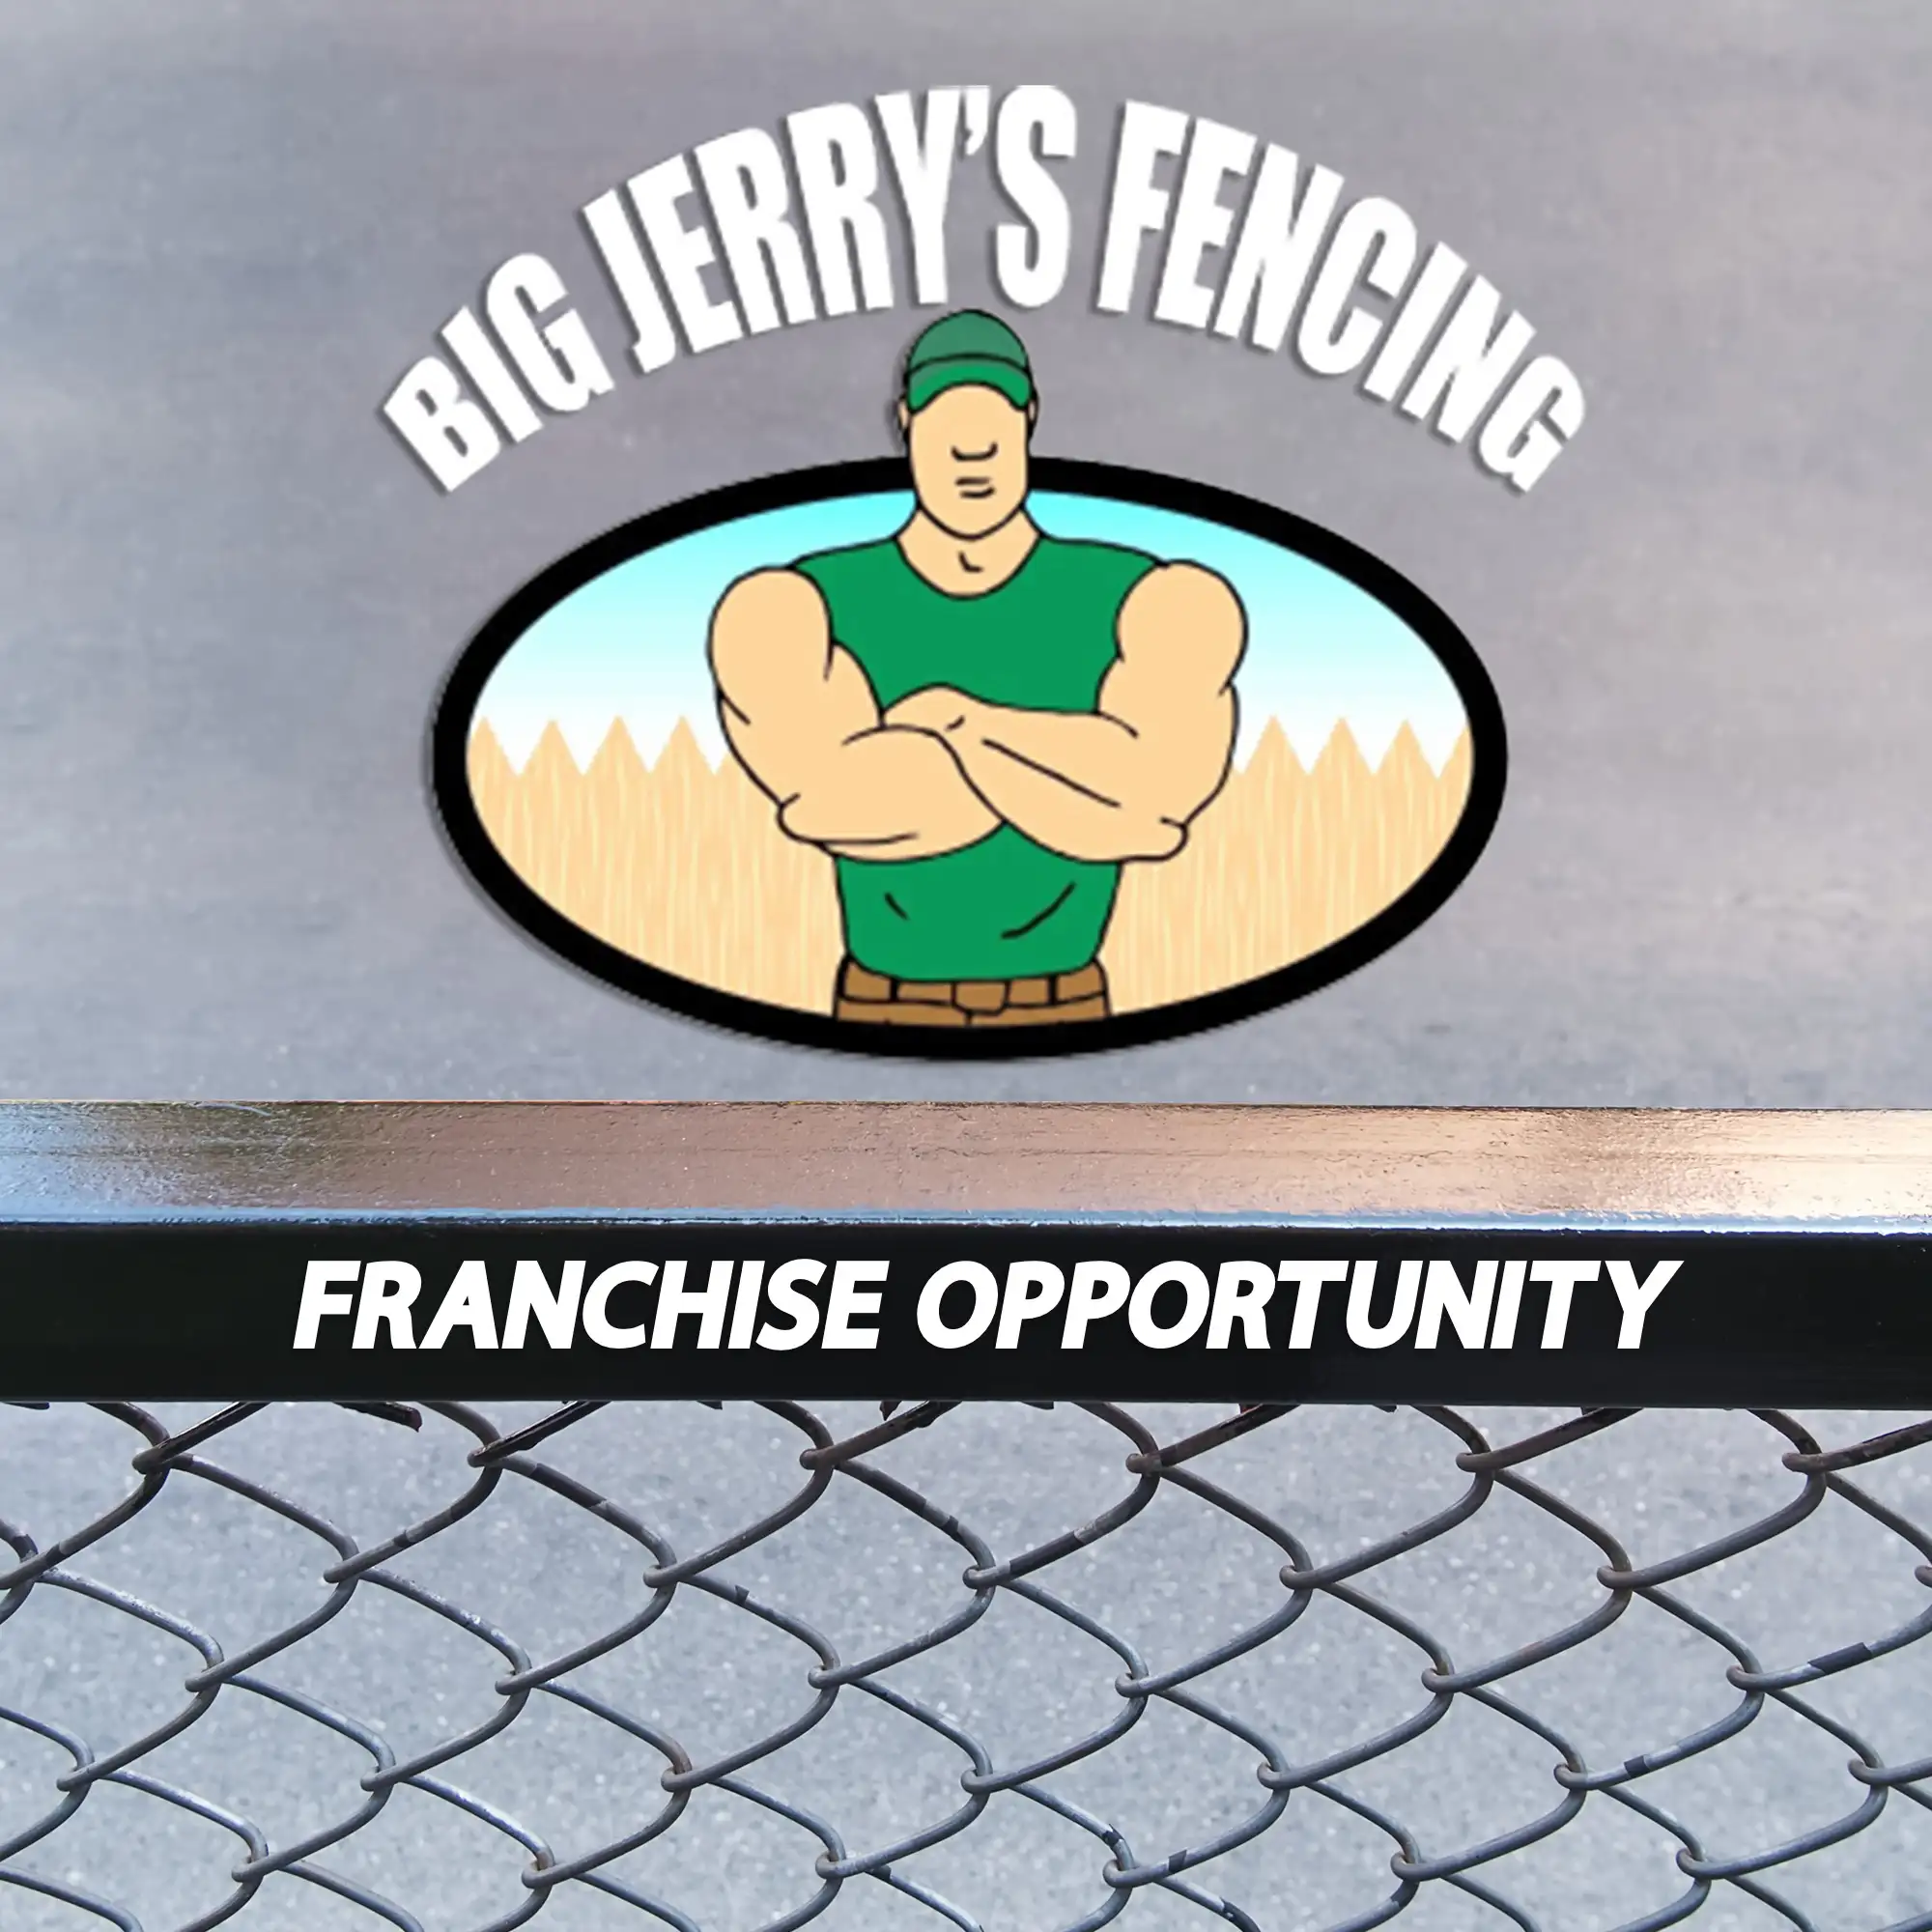 Franchise Opportunity from Big Jerry's Fencing